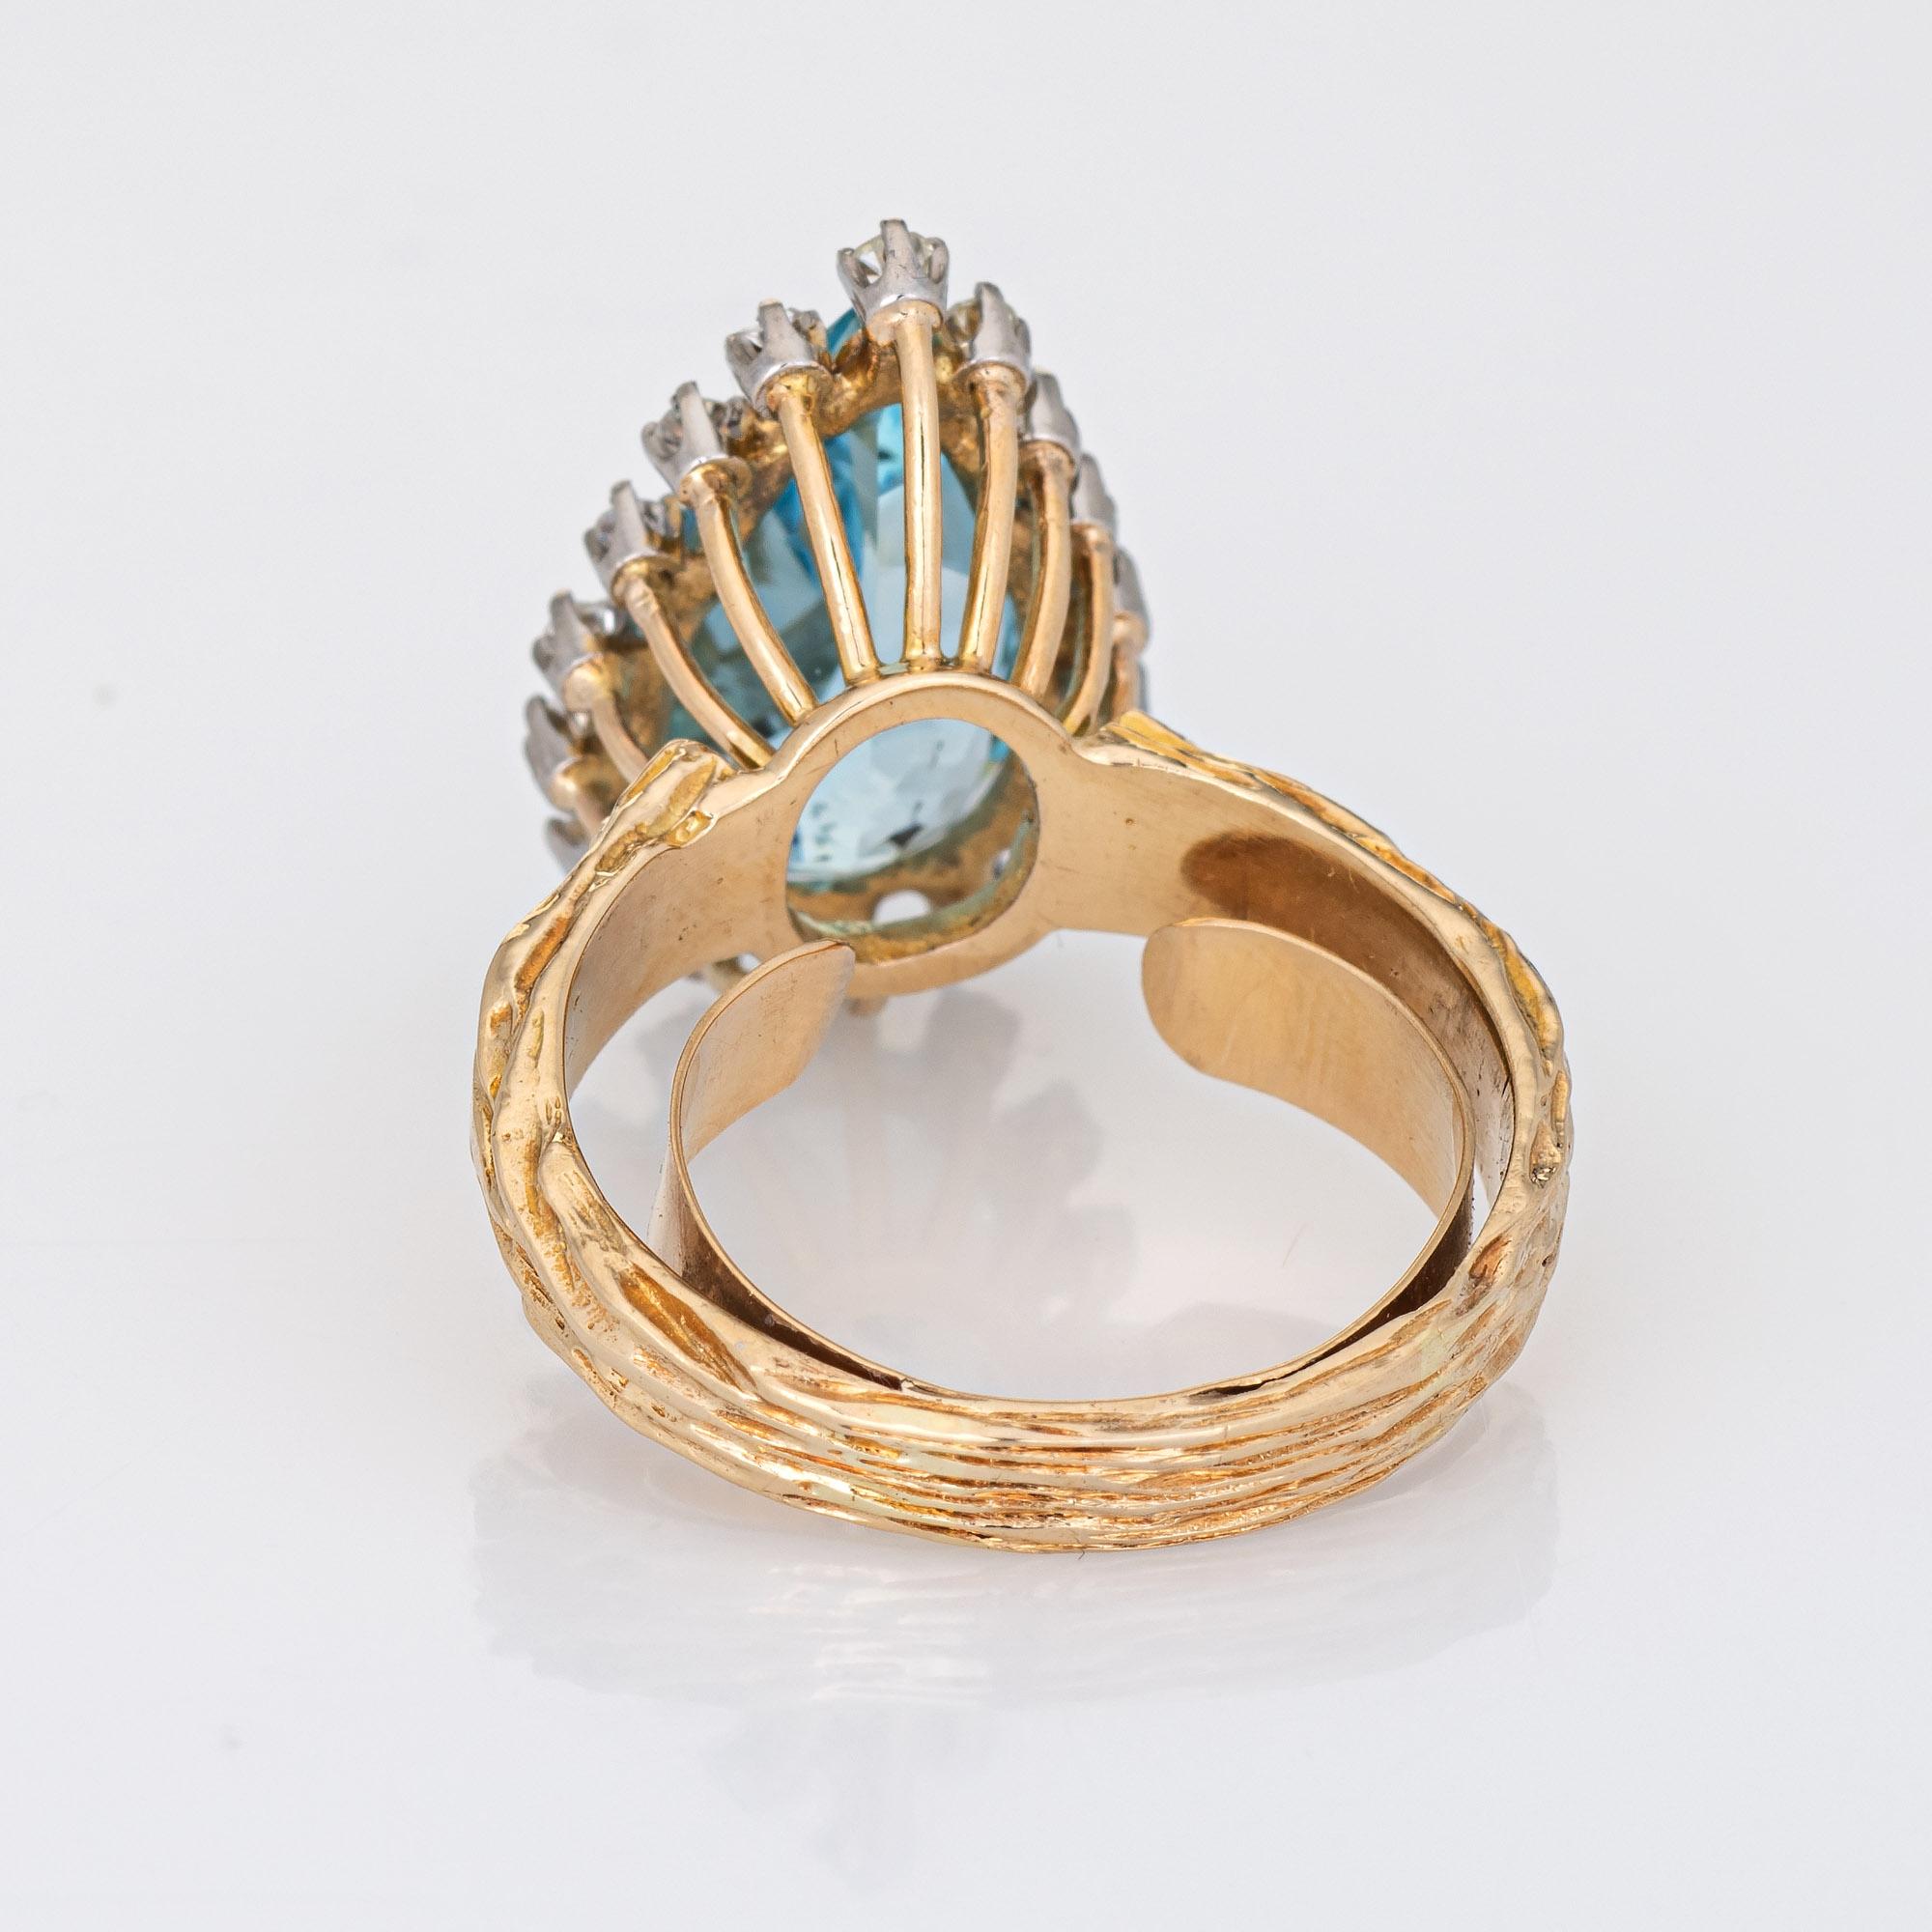 Vintage Aquamarine Diamond Ring Pear Cut 14k Yellow Gold Fine Jewelry In Good Condition For Sale In Torrance, CA